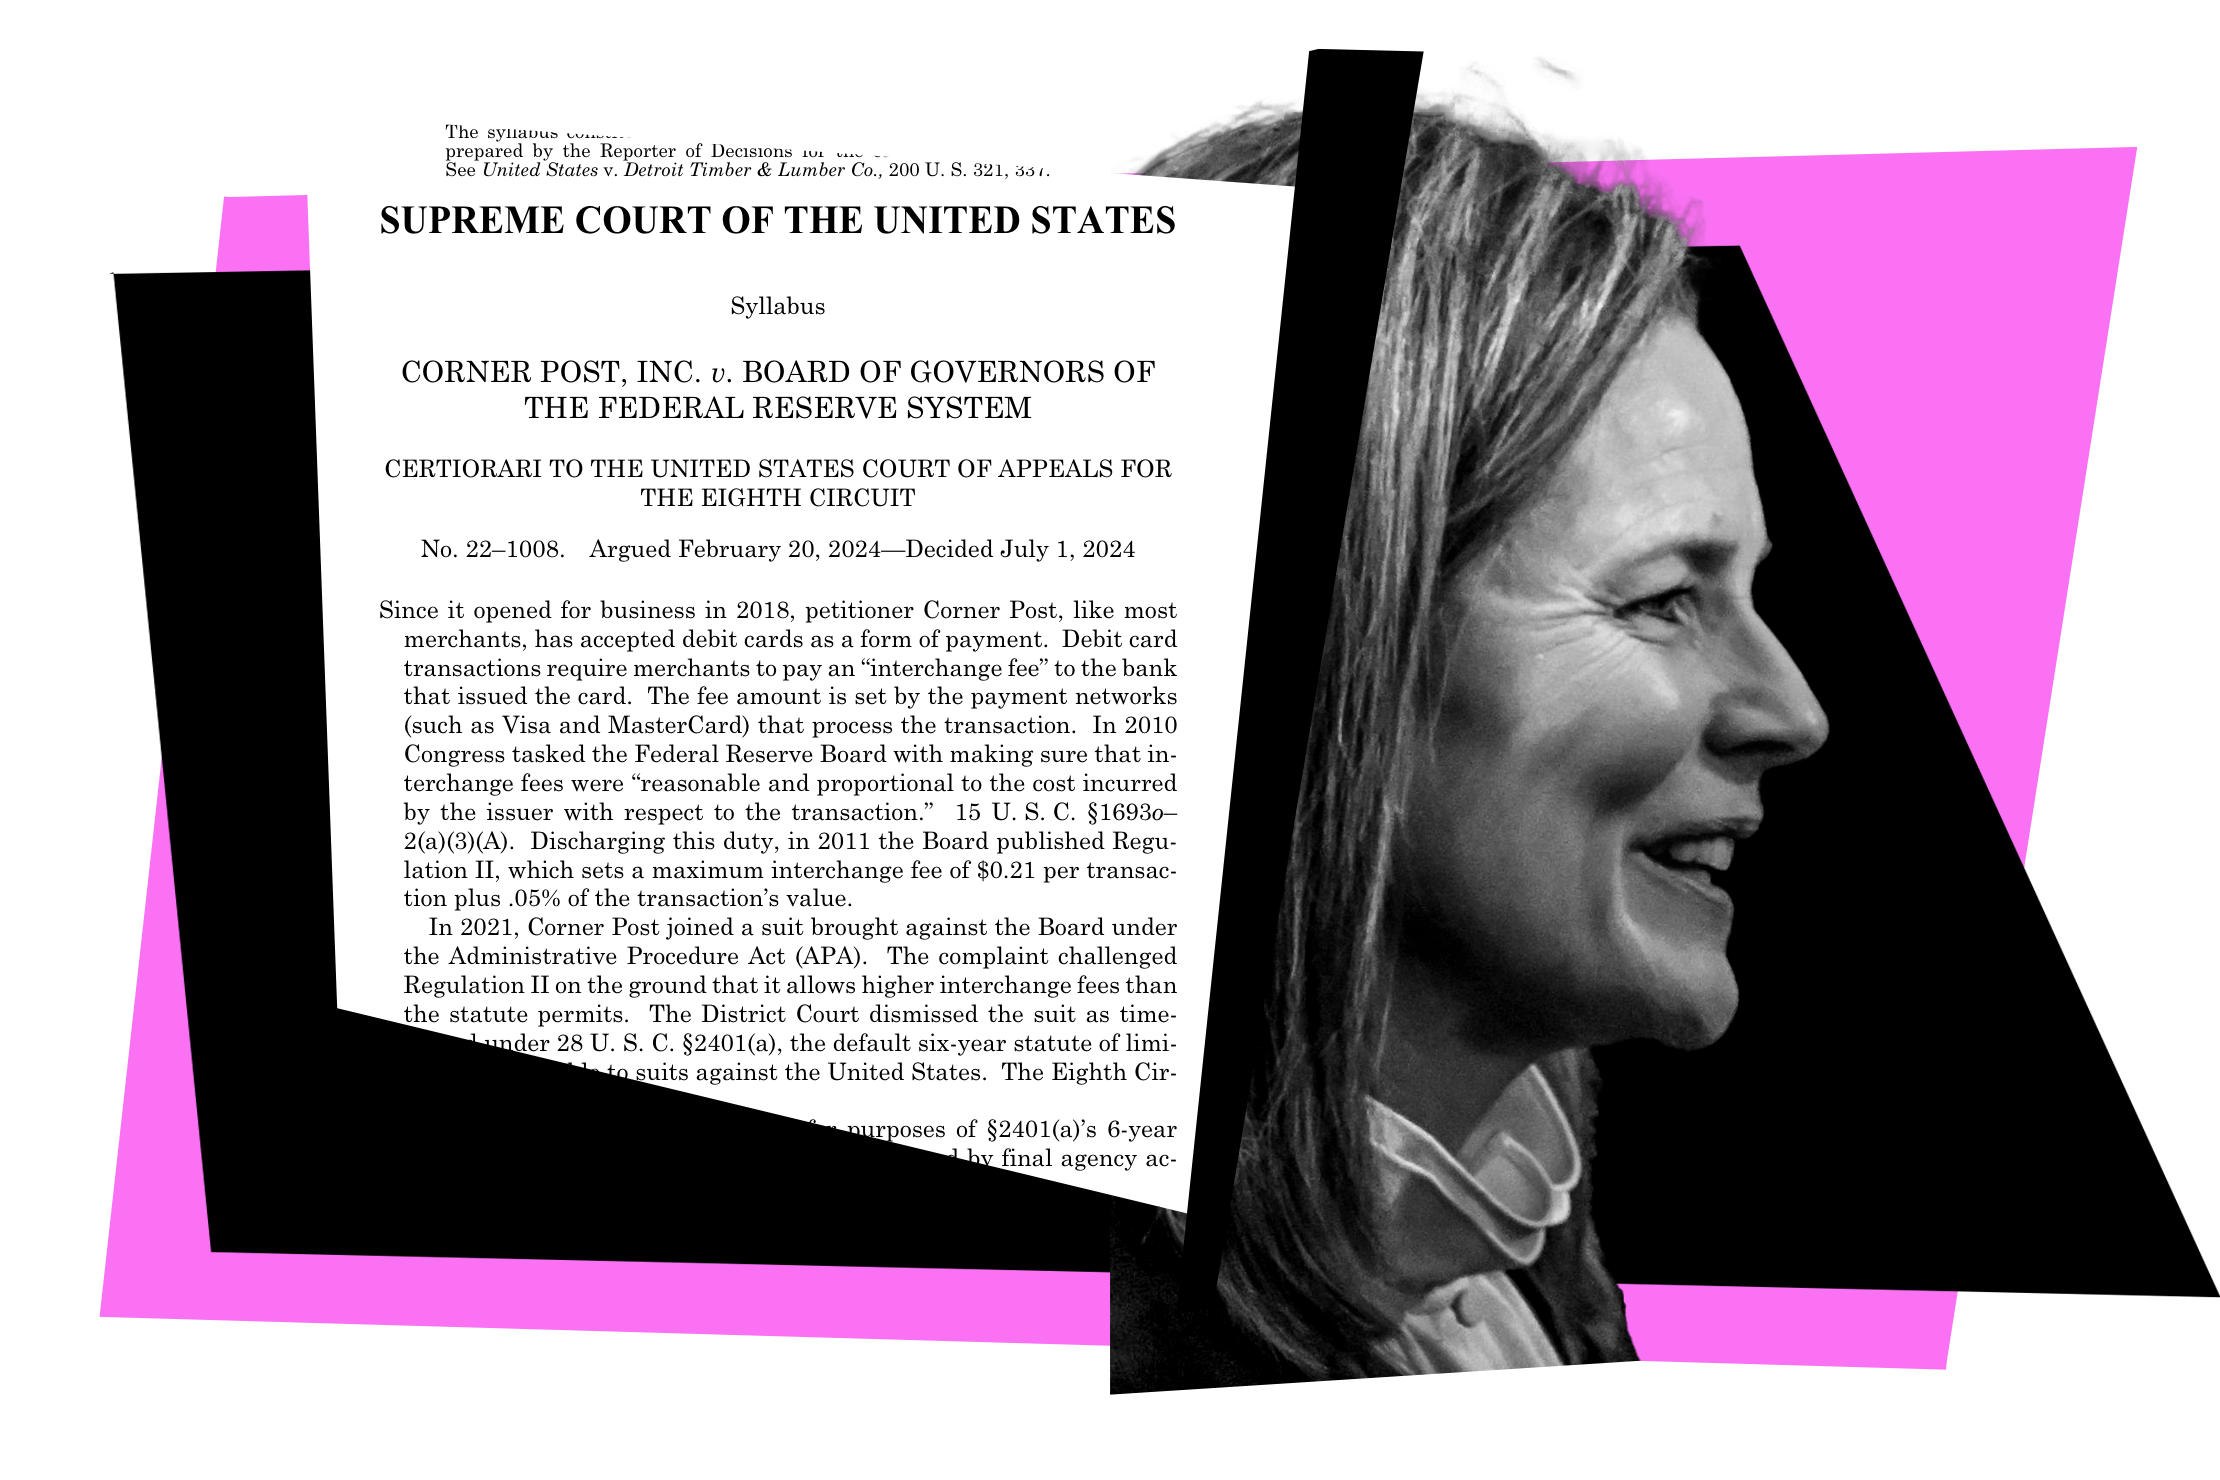 The text of Corner post, Amy Coney Barrett turned away from it smiling.